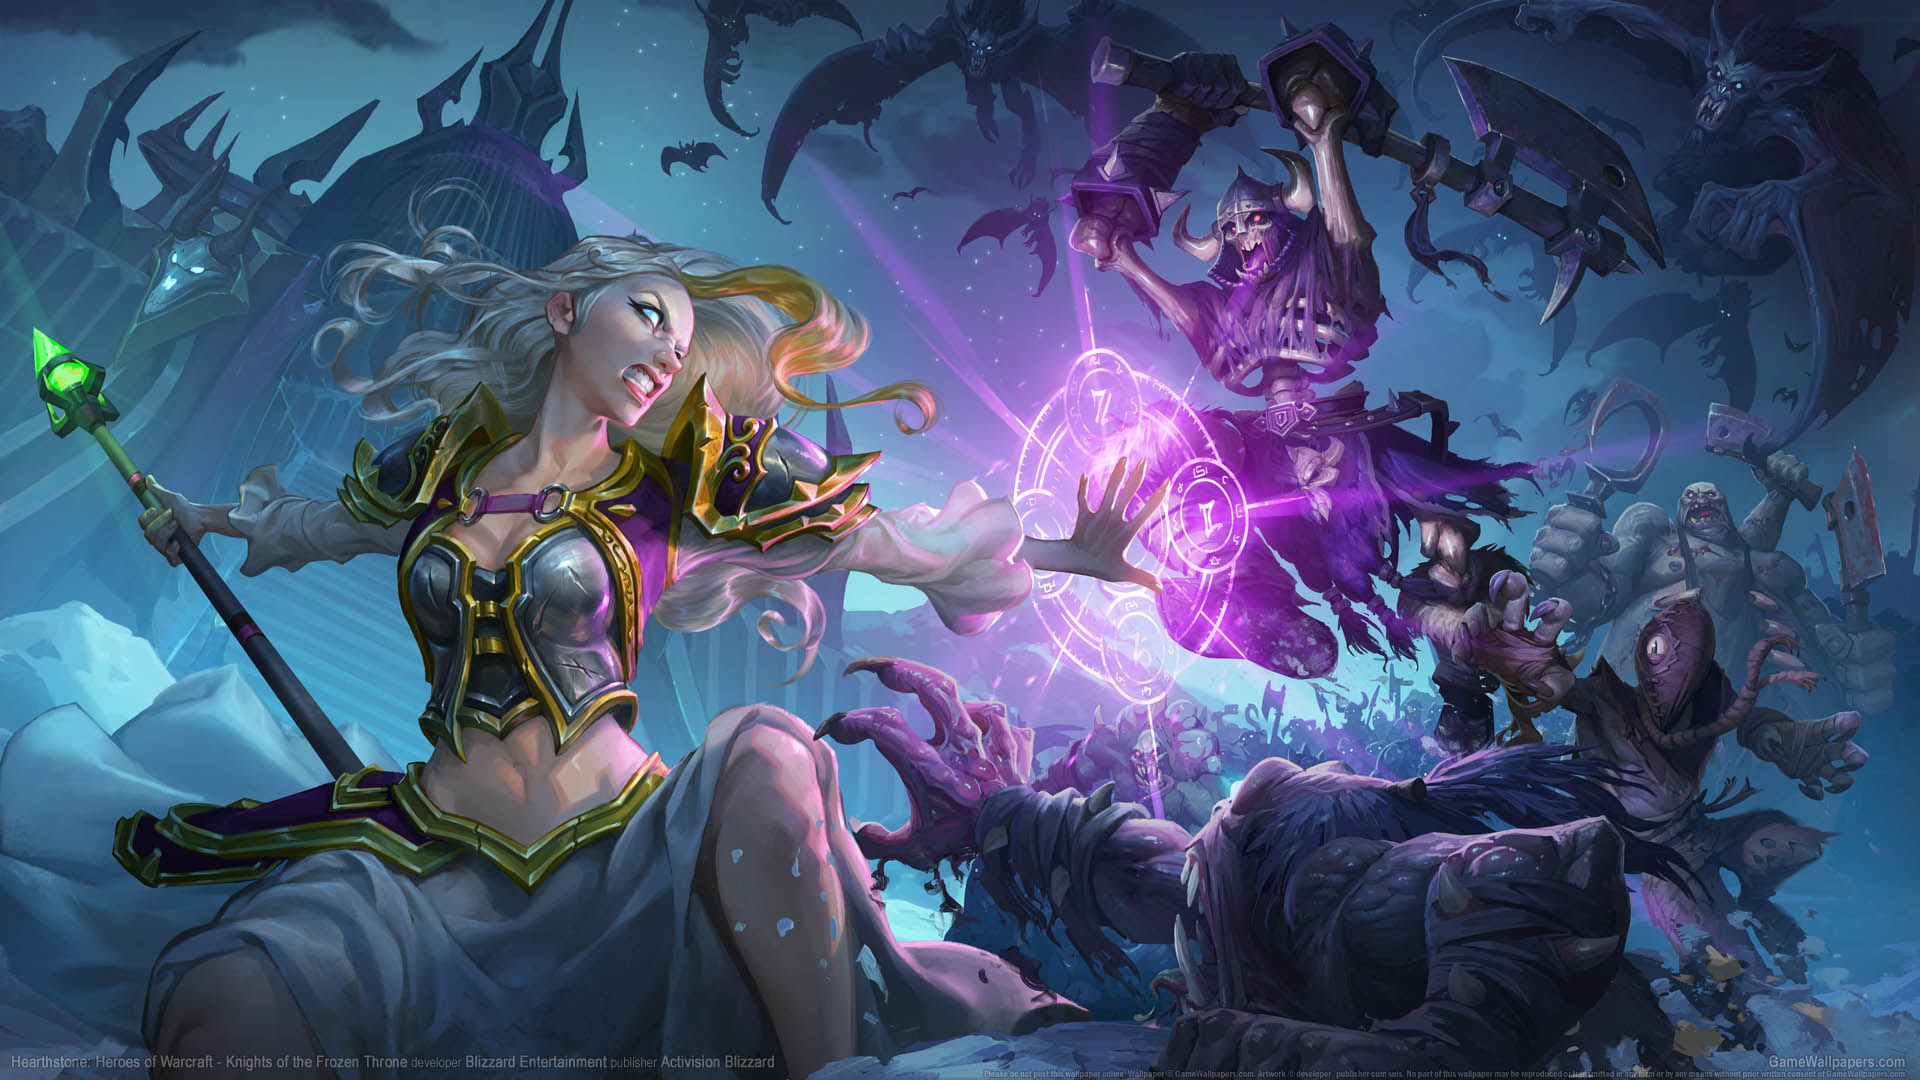 Hearthstone: Heroes of Warcraft - Knights of the Frozen Throne achtergrond 01 1920x1080